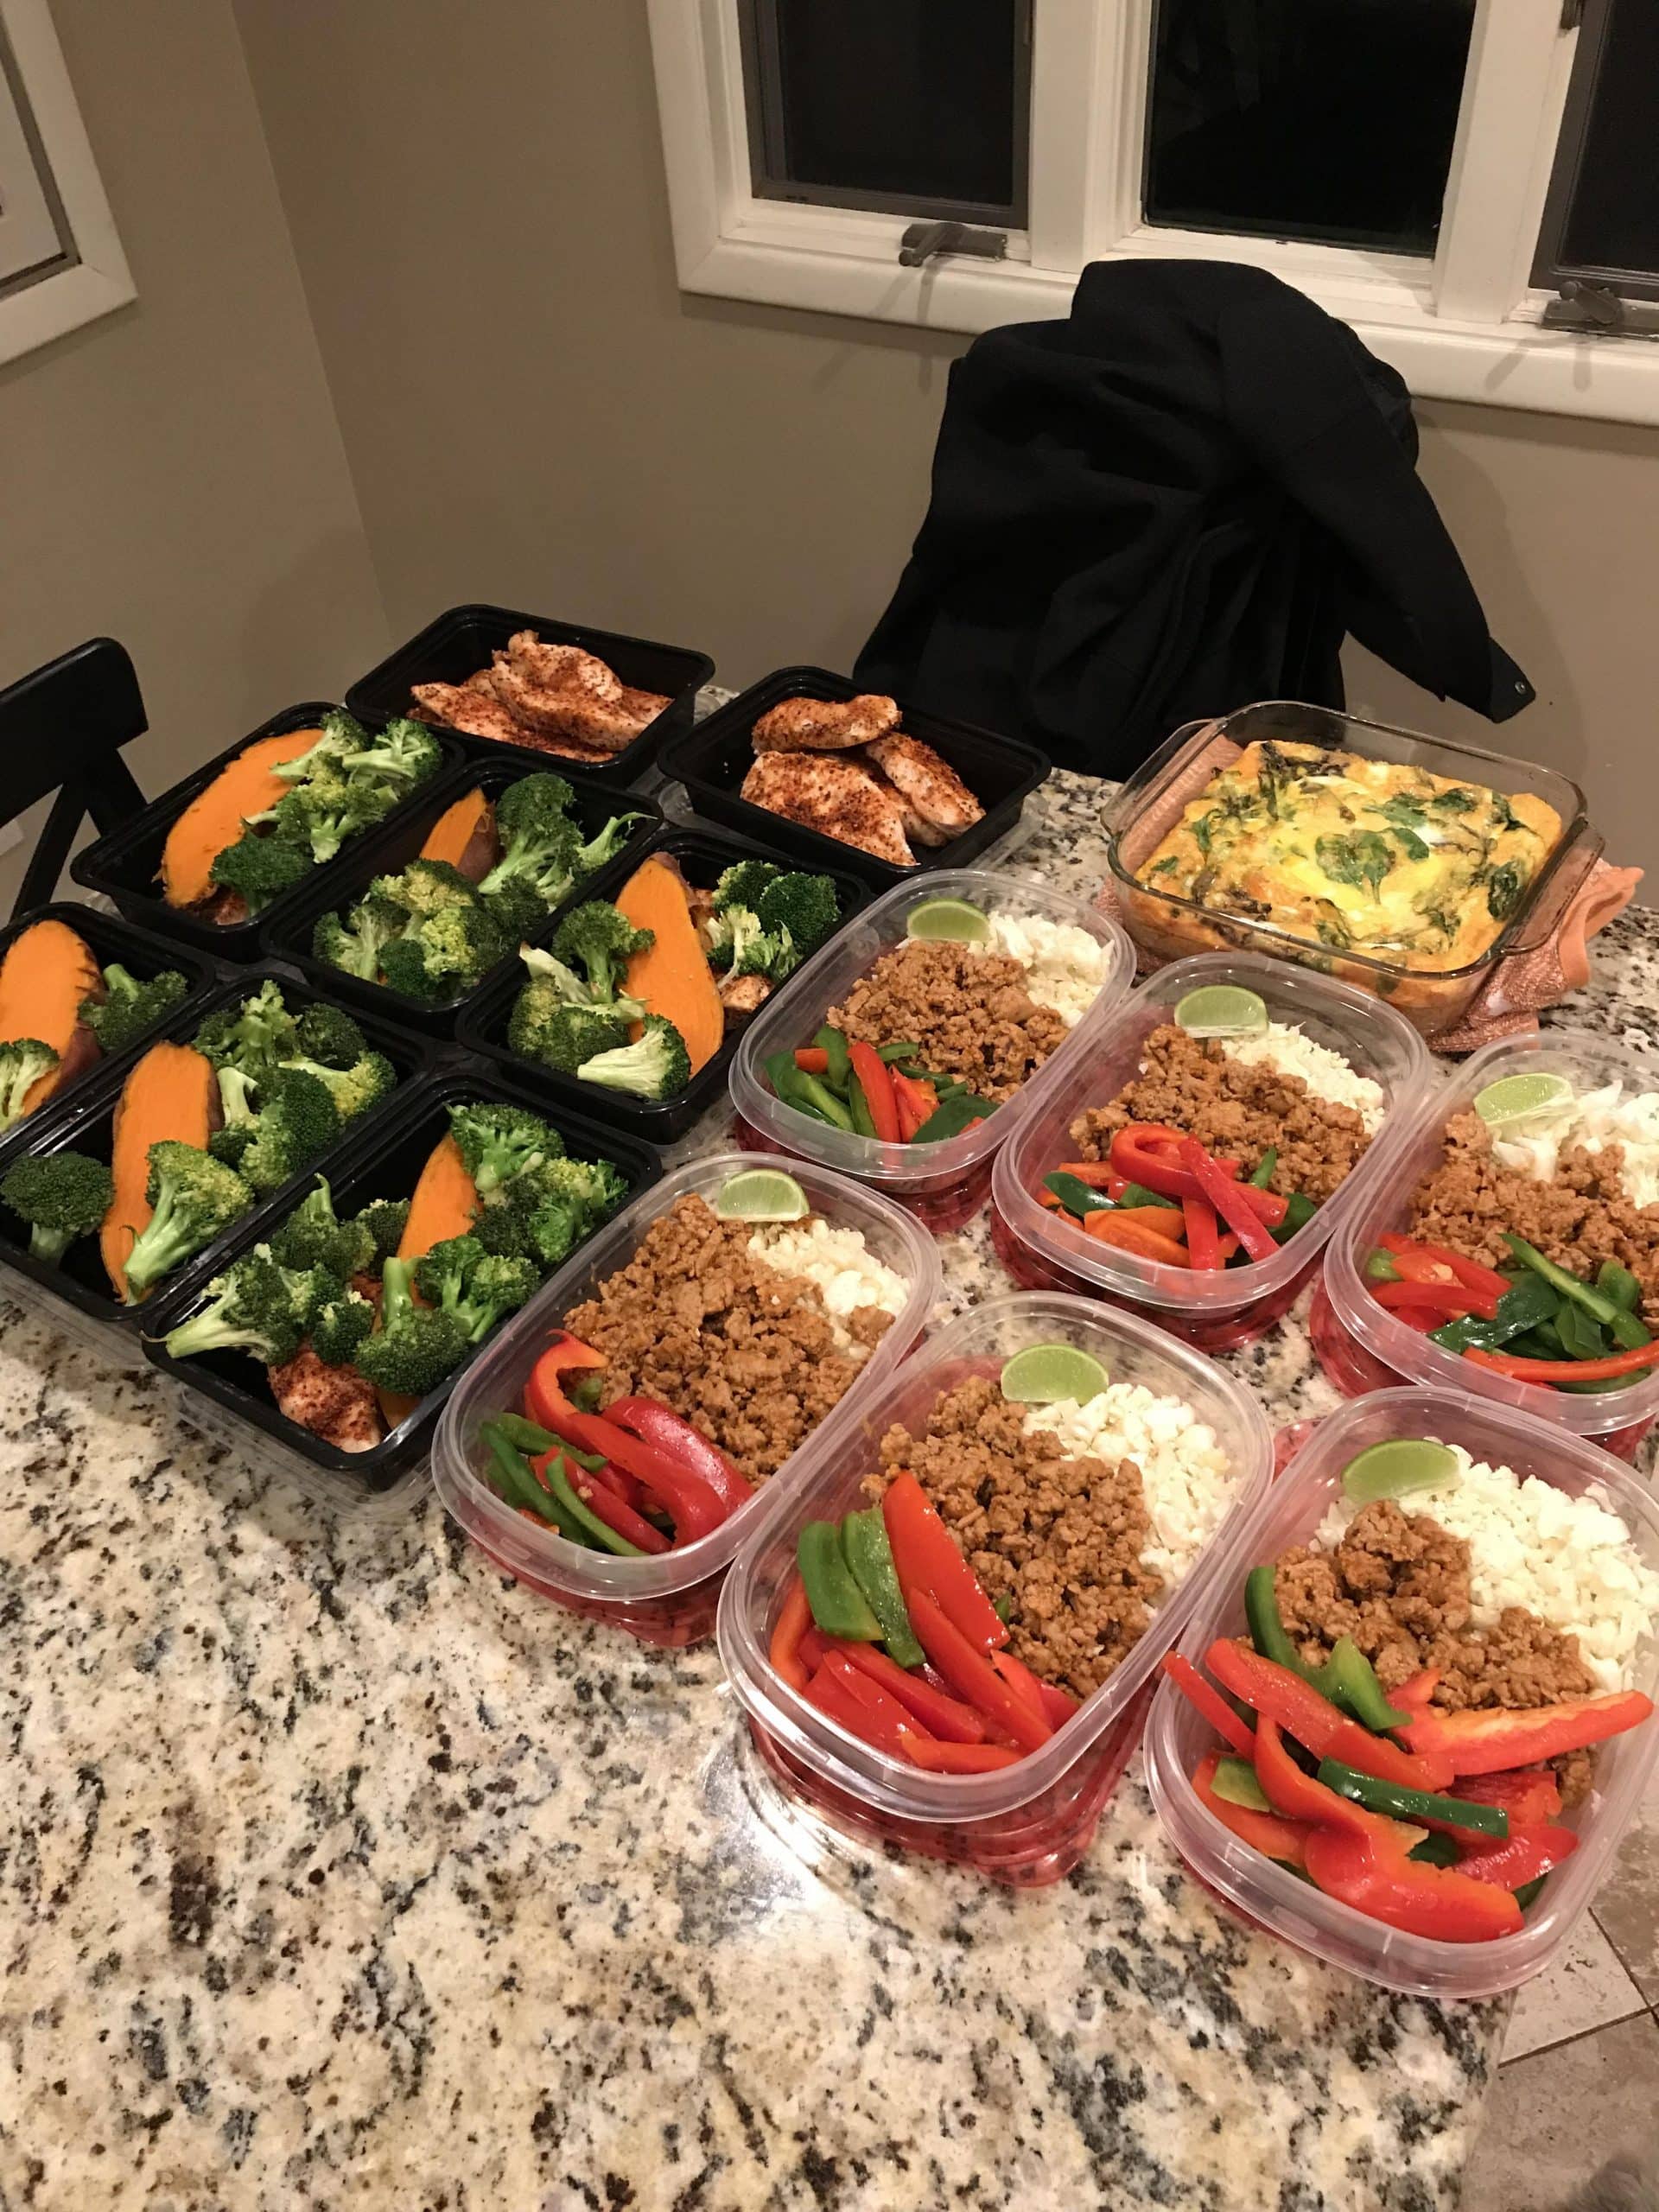 1 week of food. High protein, low carb. : MealPrepSunday